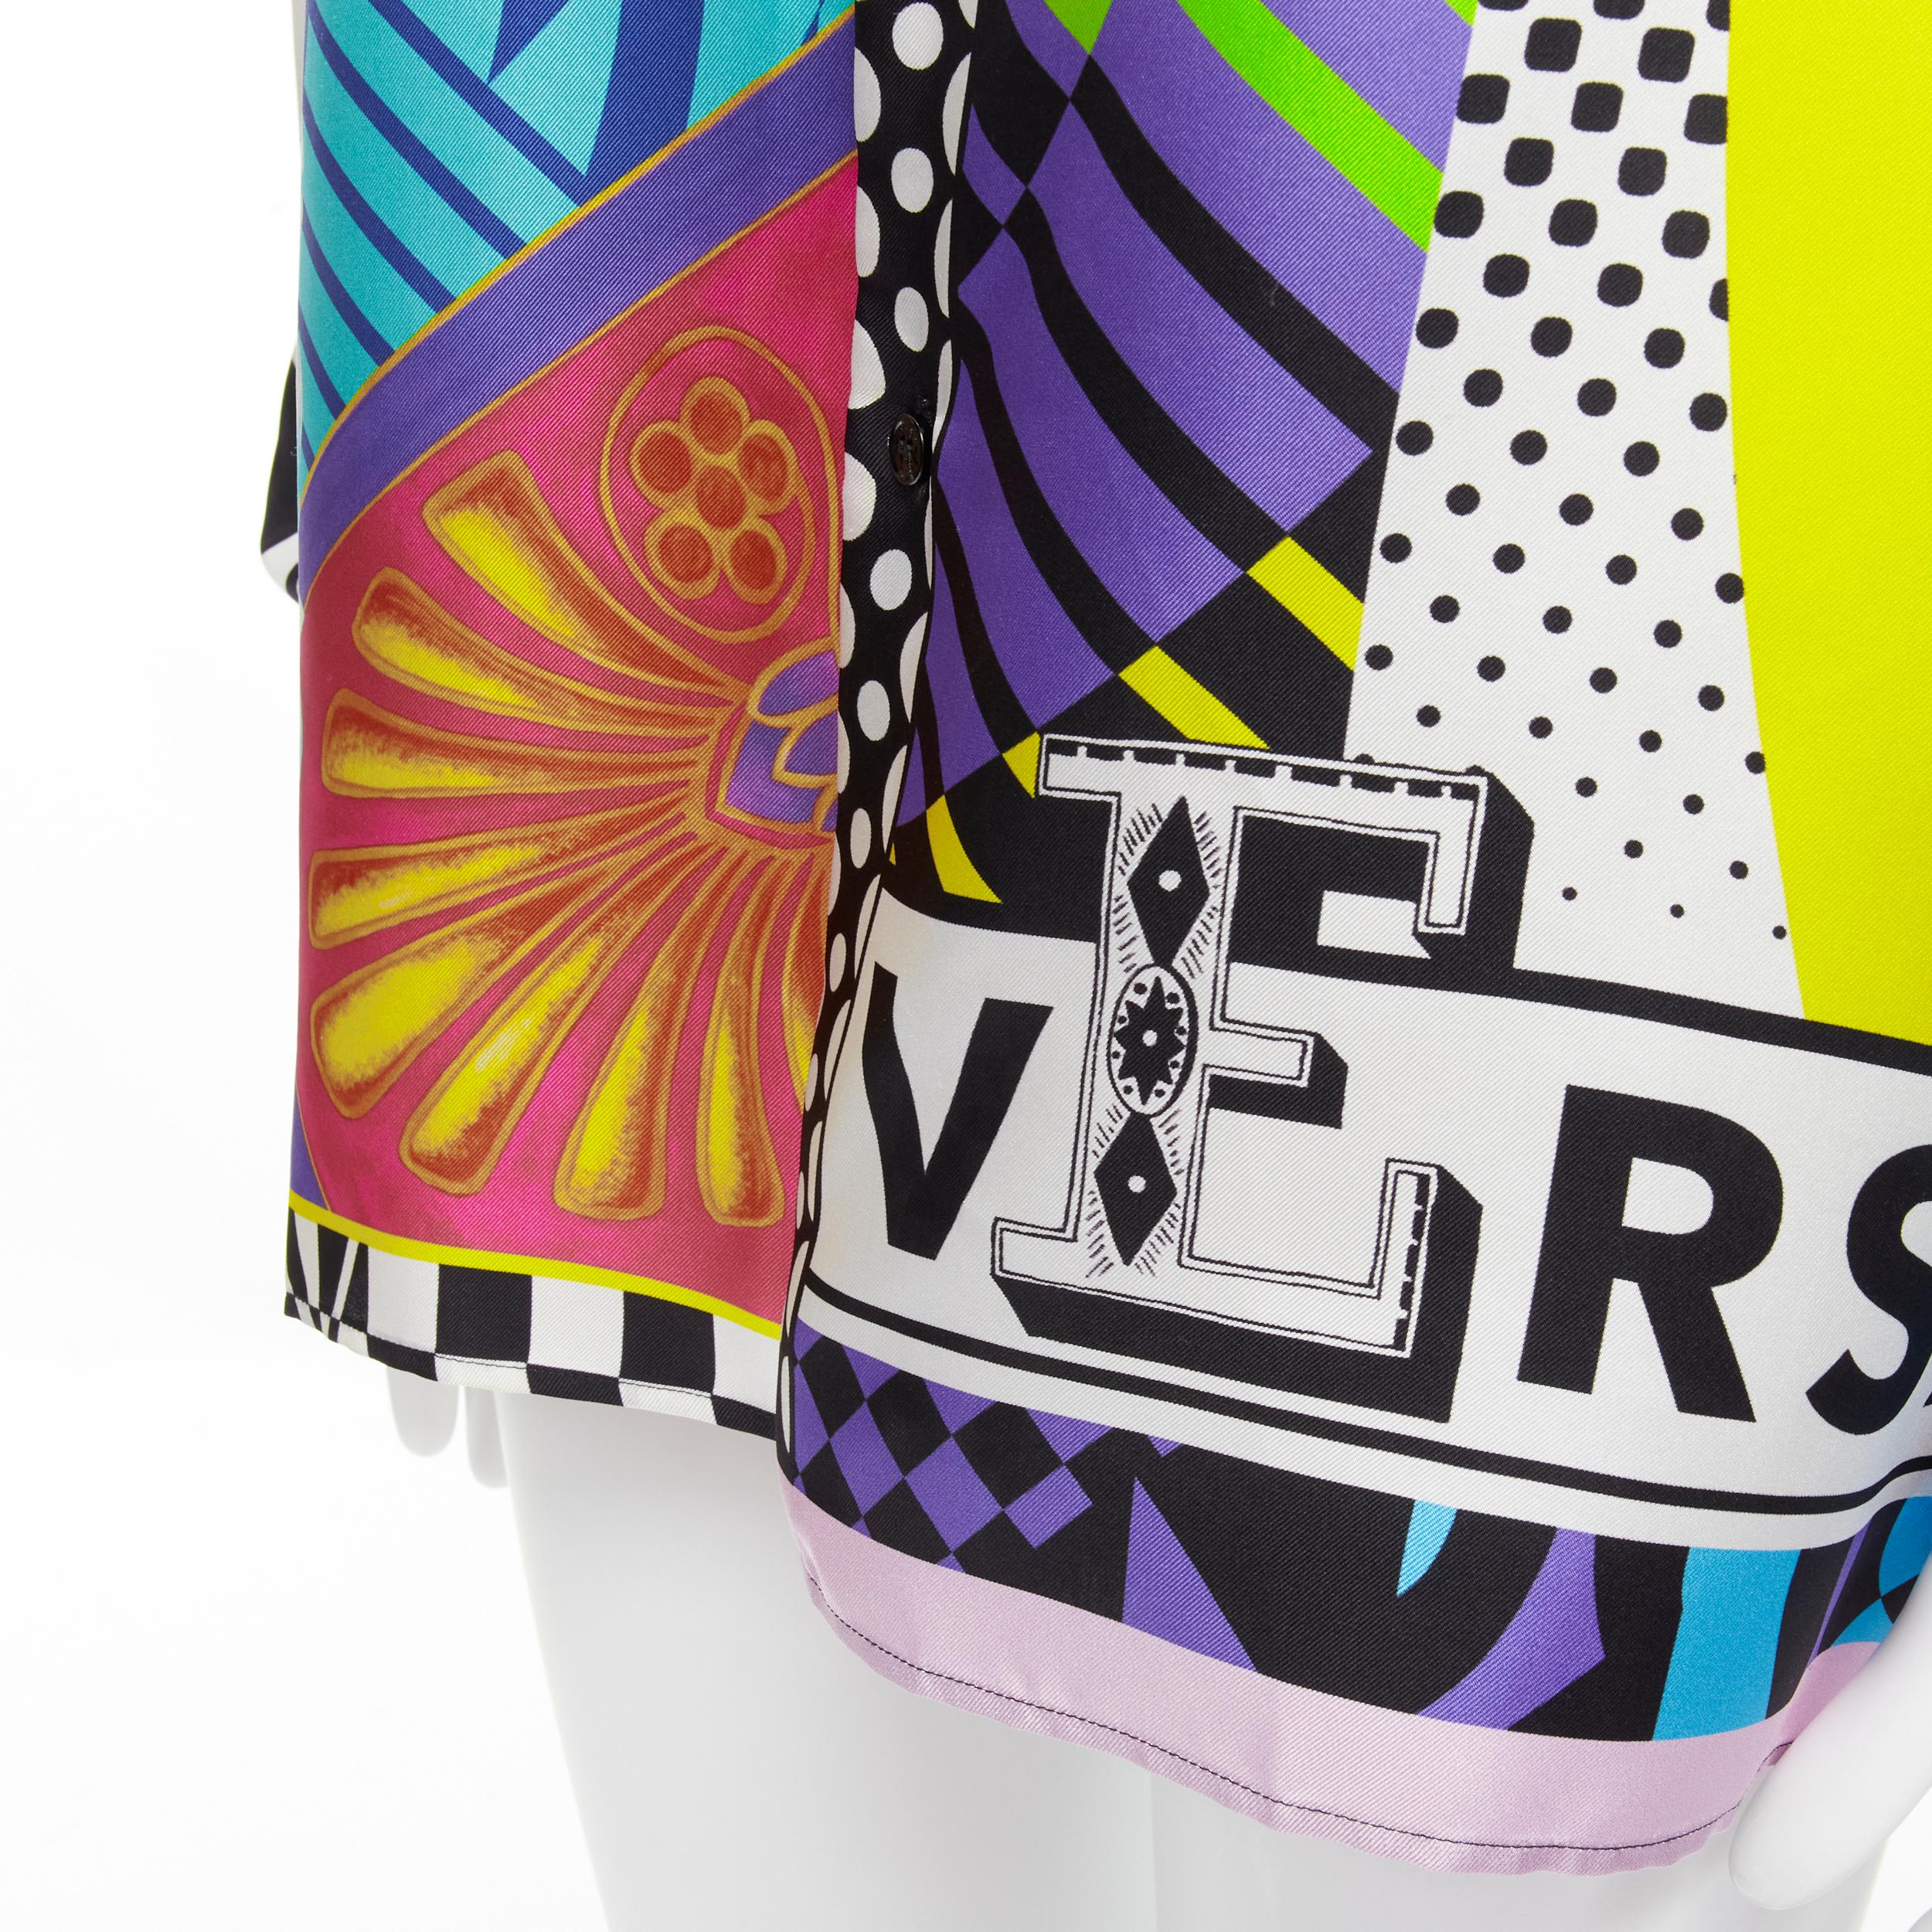 new VERSACE 2020 Runway Pop Temple collage vintage print silk shirt EU39 M 
Reference: TGAS/C00282 
Brand: Versace 
Designer: Donatella Versace 
Collection: Pre-Fall 2020 Pop Temple Runway 
Material: Silk 
Color: Multicolour 
Pattern: